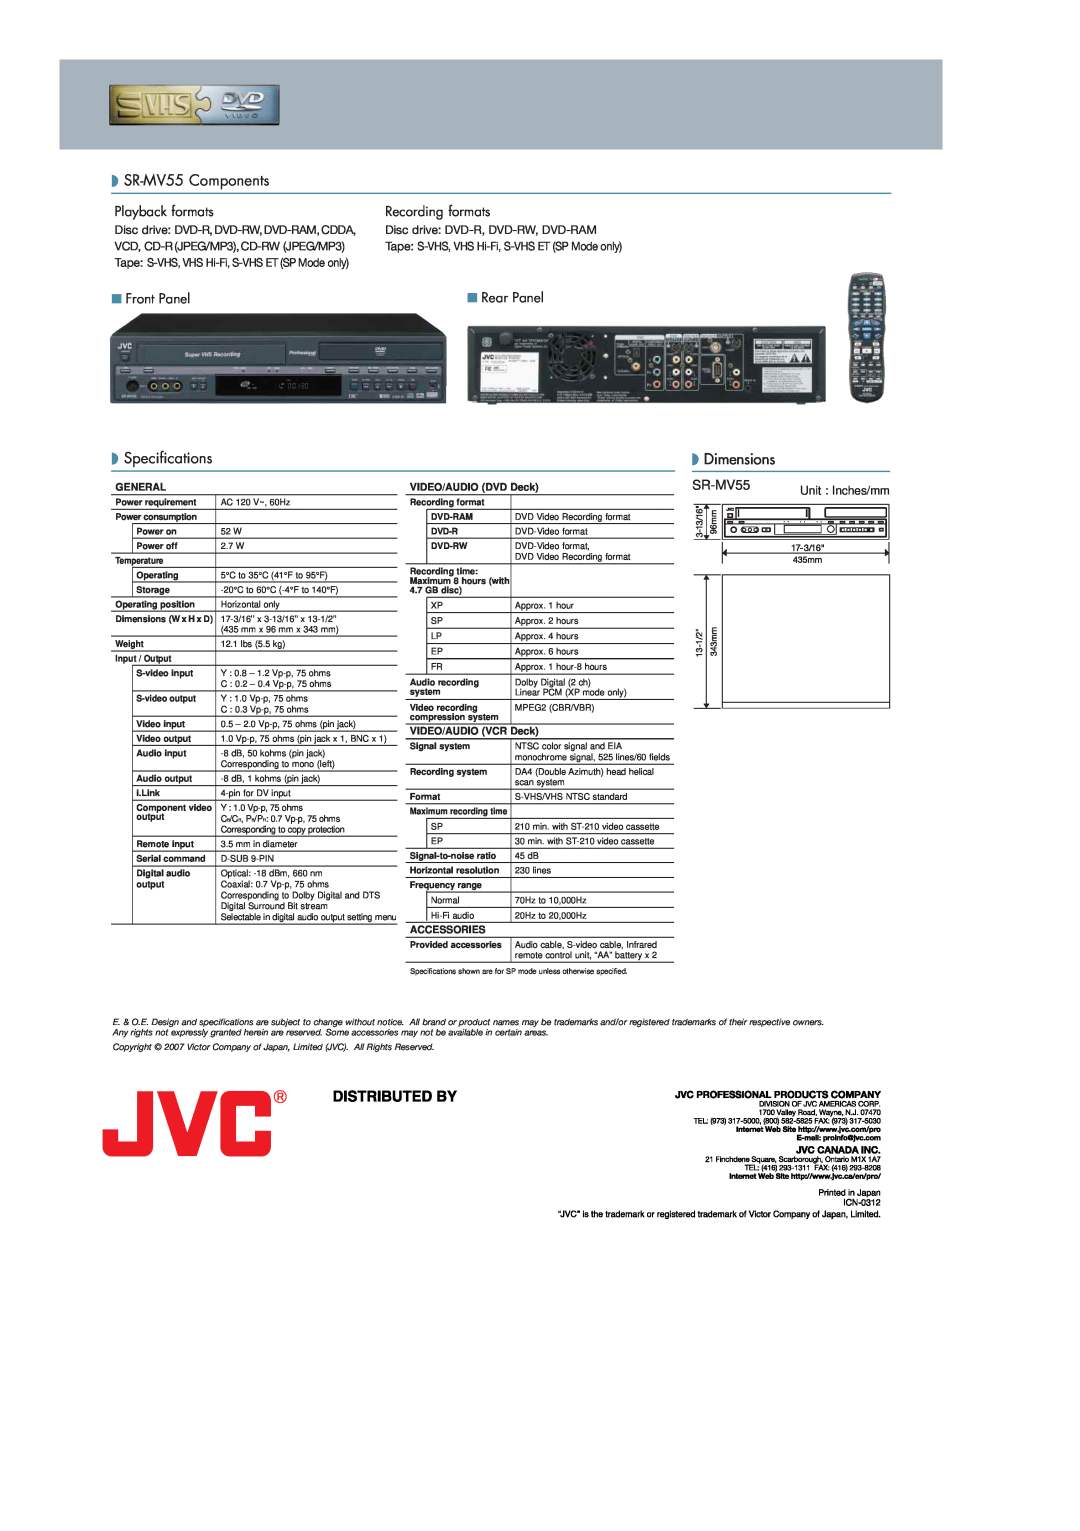 JVC manual SR-MV55 Components, Specifications, Dimensions, Playback formats, Recording formats, Front Panel, Rear Panel 